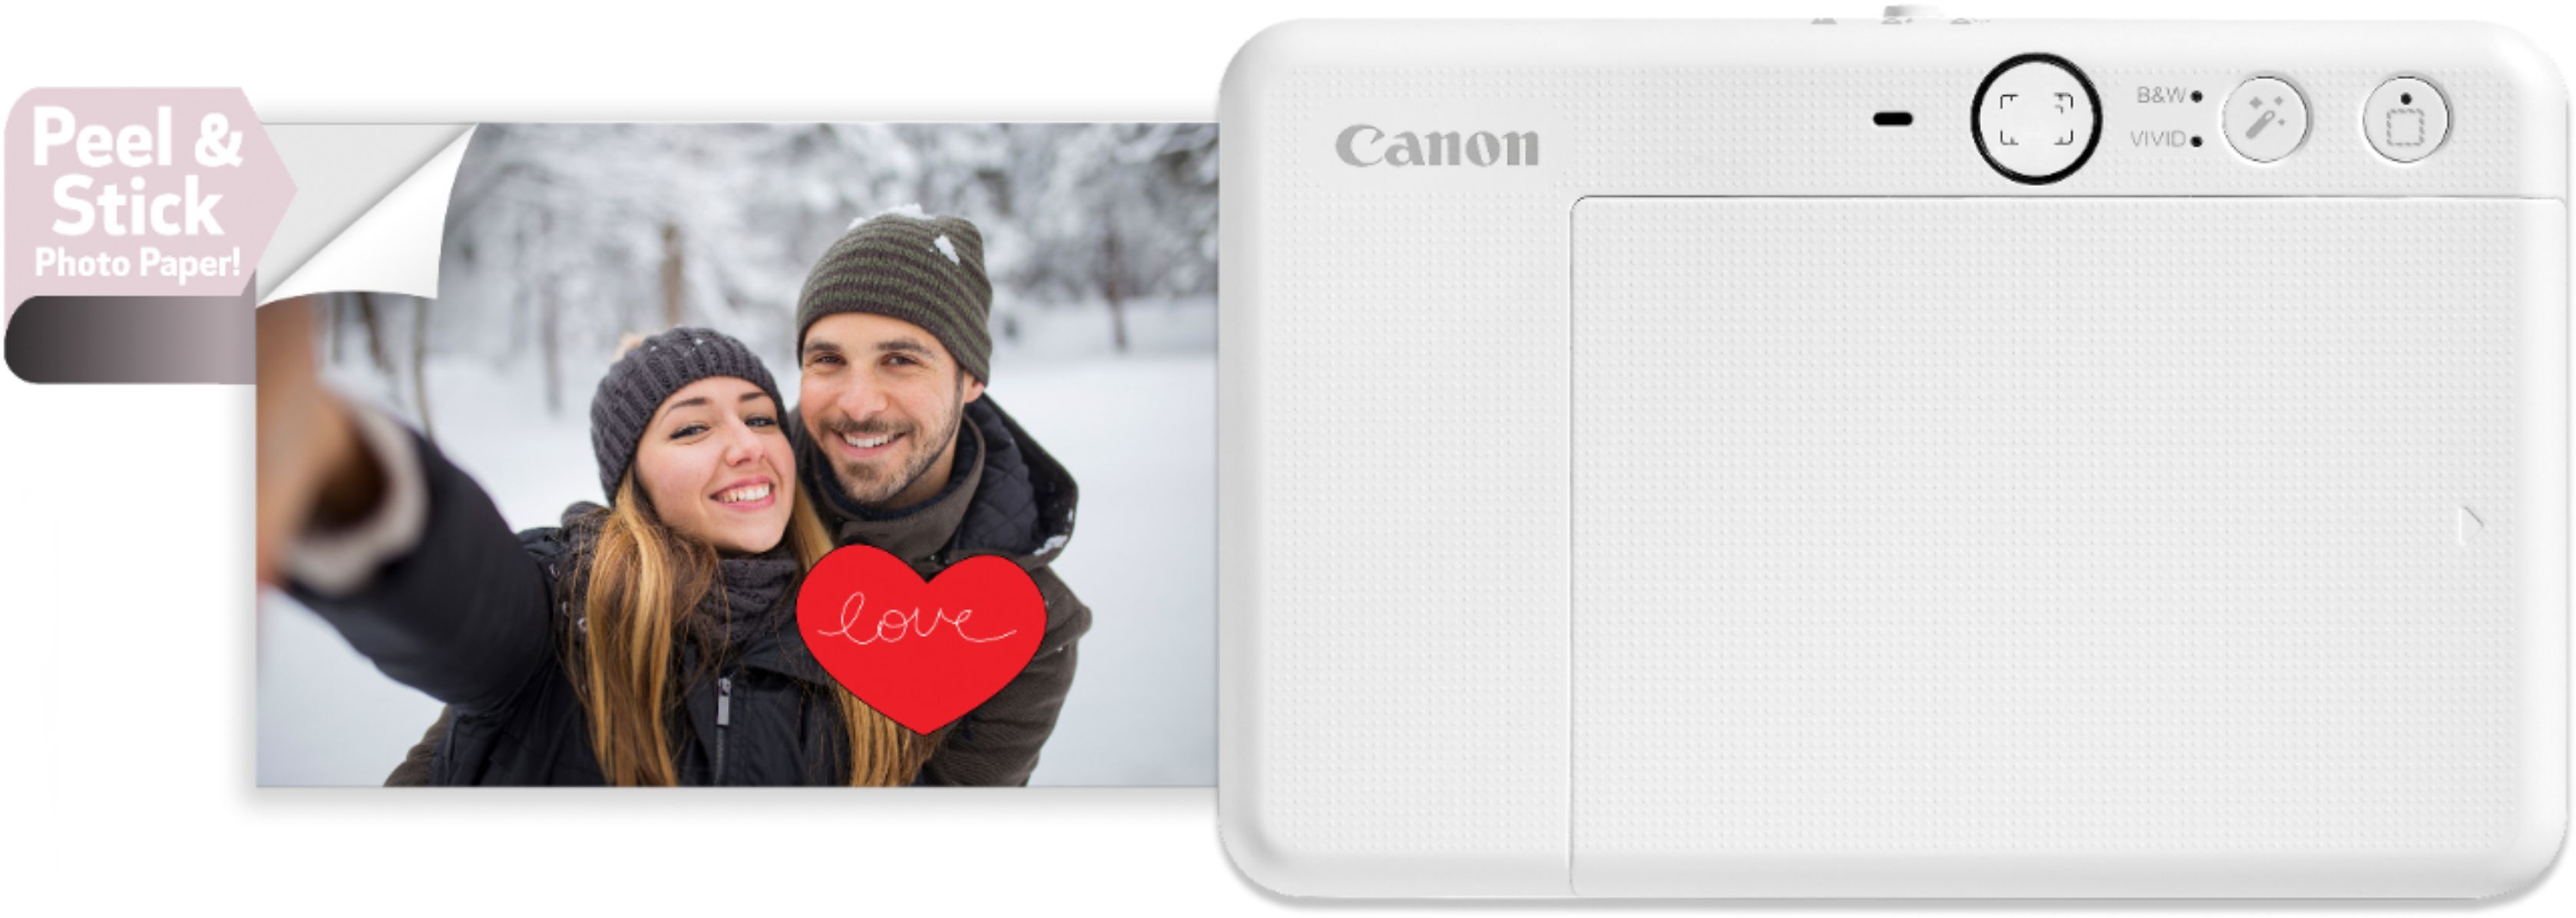 Canon IVY CLIQ+2 review: A fun instant camera and printer for all ages